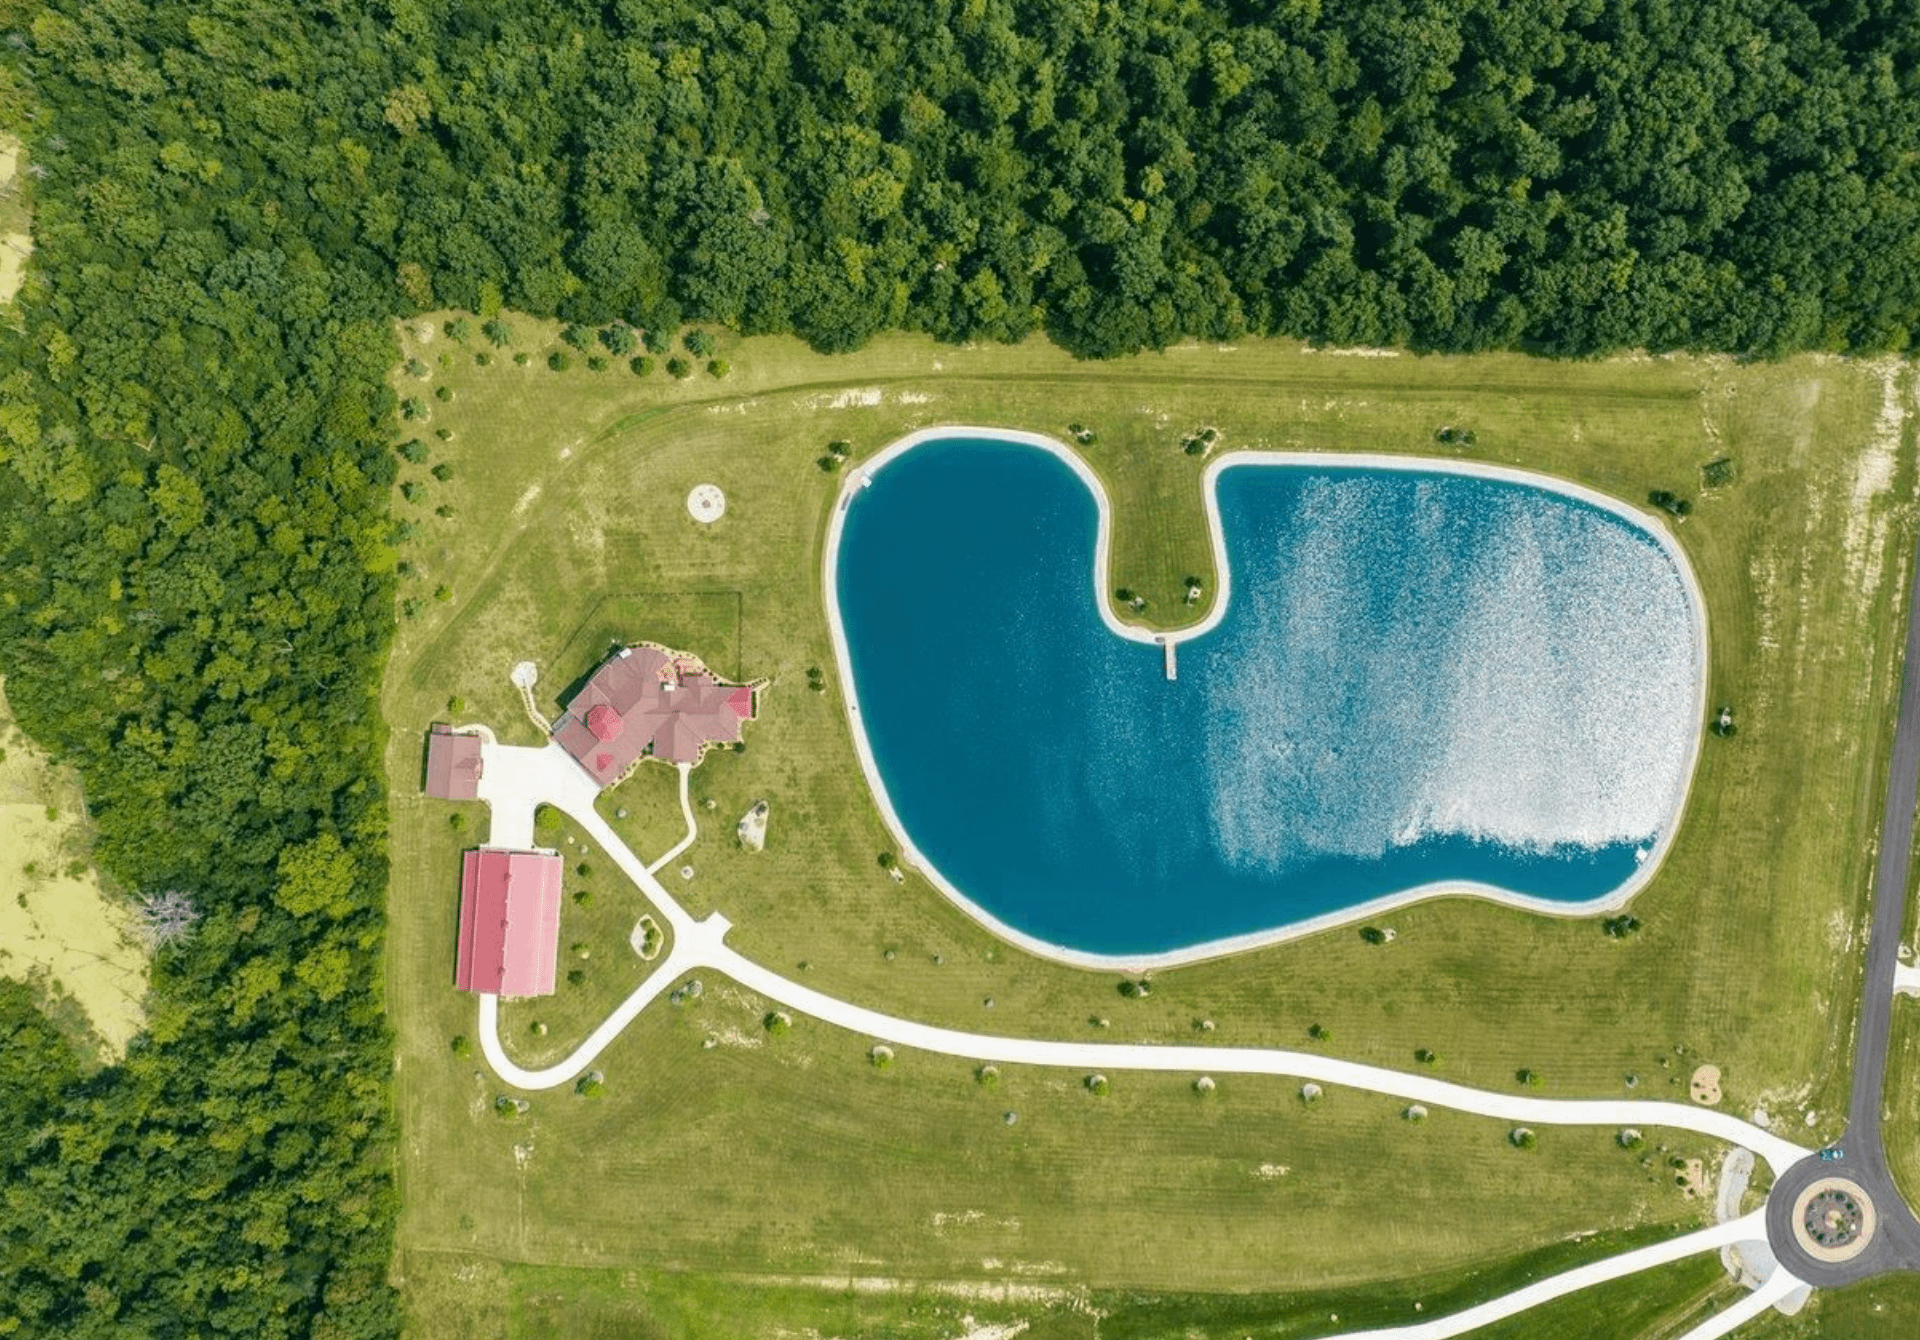 41 Acre Indiana Estate With Stocked Pond (PHOTOS)